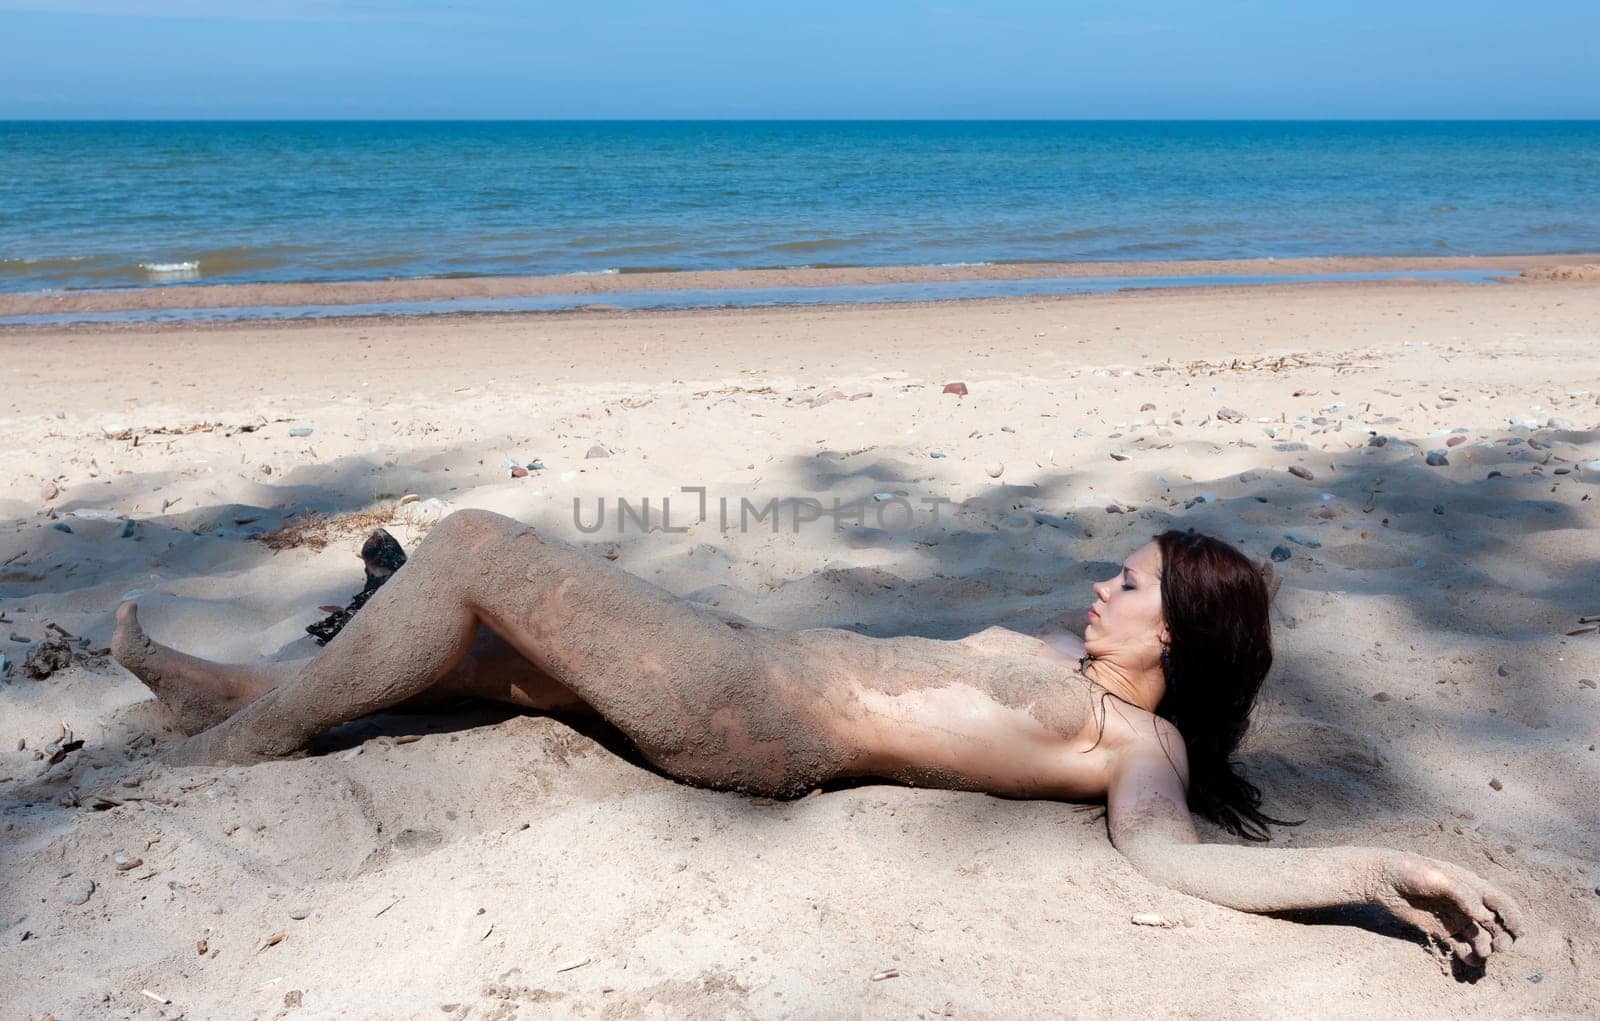 Youth, beauty, healthy lifestyle and nudity. Young fully naked woman with body covered with sand on the sea coast on a sunny day.